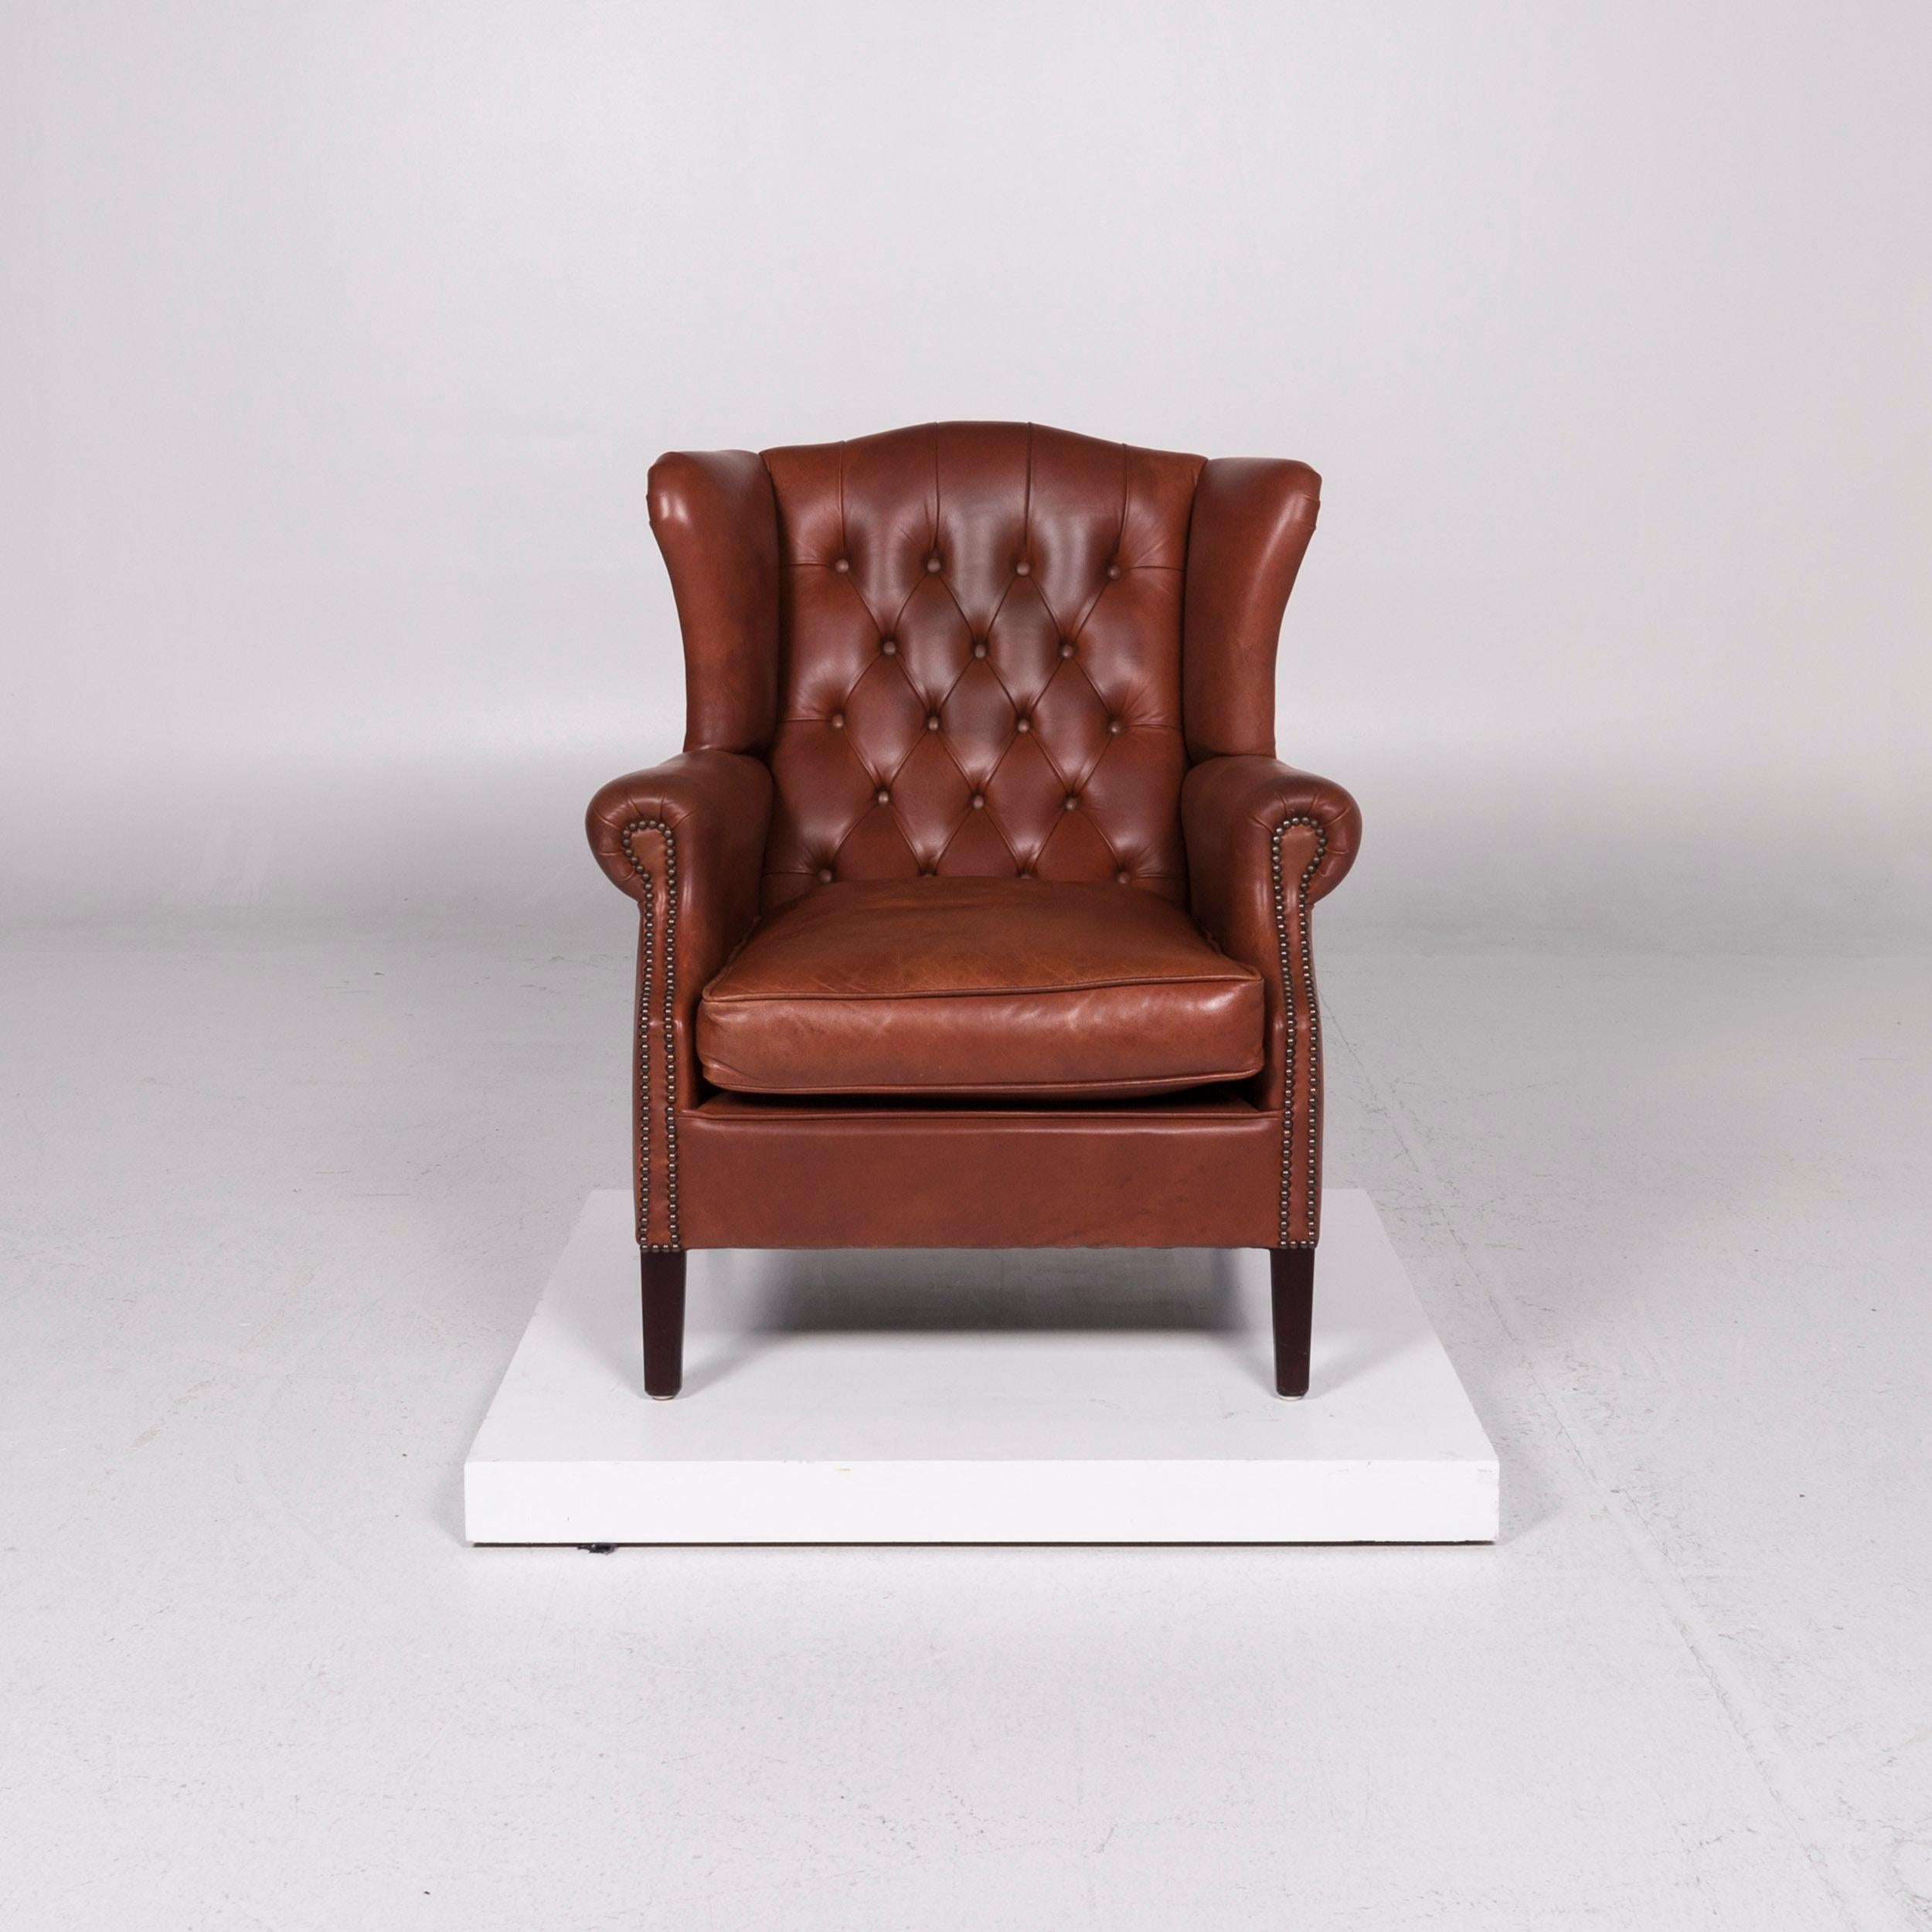 We bring to you a Chesterfield leather armchair red brown retro.

 Product measurements in centimeters:
 
Depth 94
Width 82
Height 99
Seat-height 49
Rest-height 60
Seat-depth 59
Seat-width 52
Back-height 50.
  